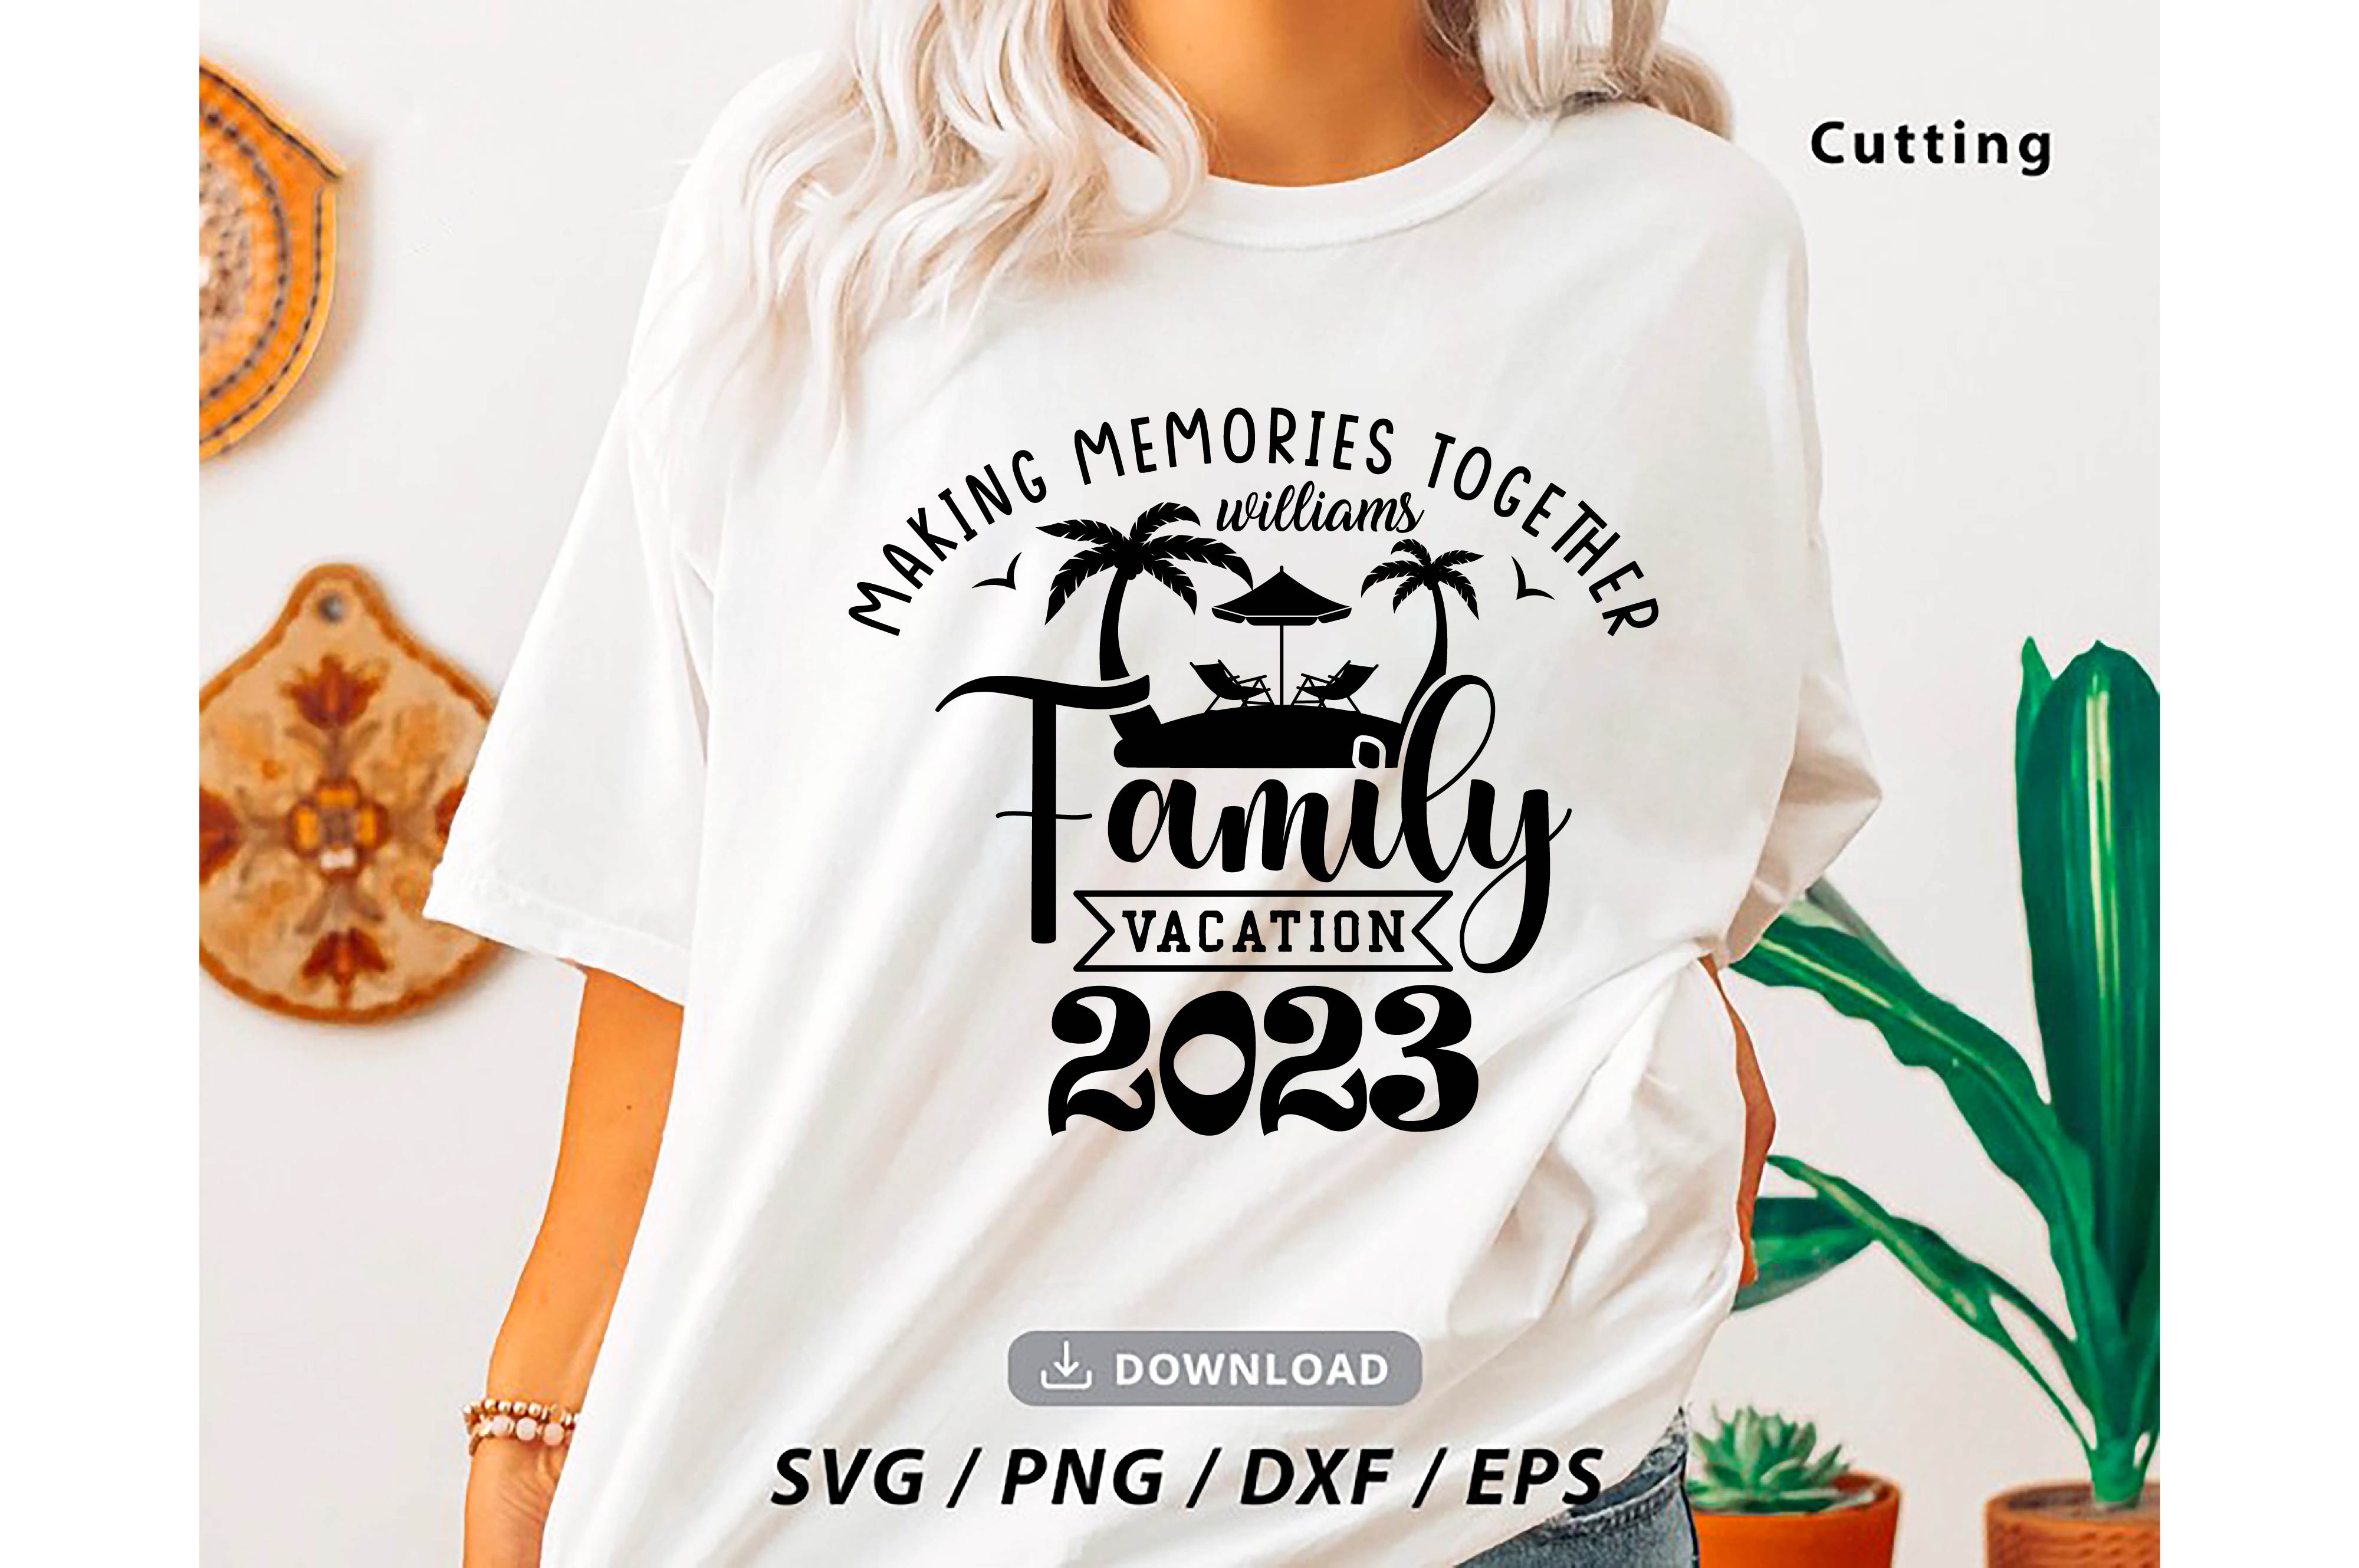 family vacation 2023 svg making memories together custom family vacation cut files summer 2023 vacations 07 847